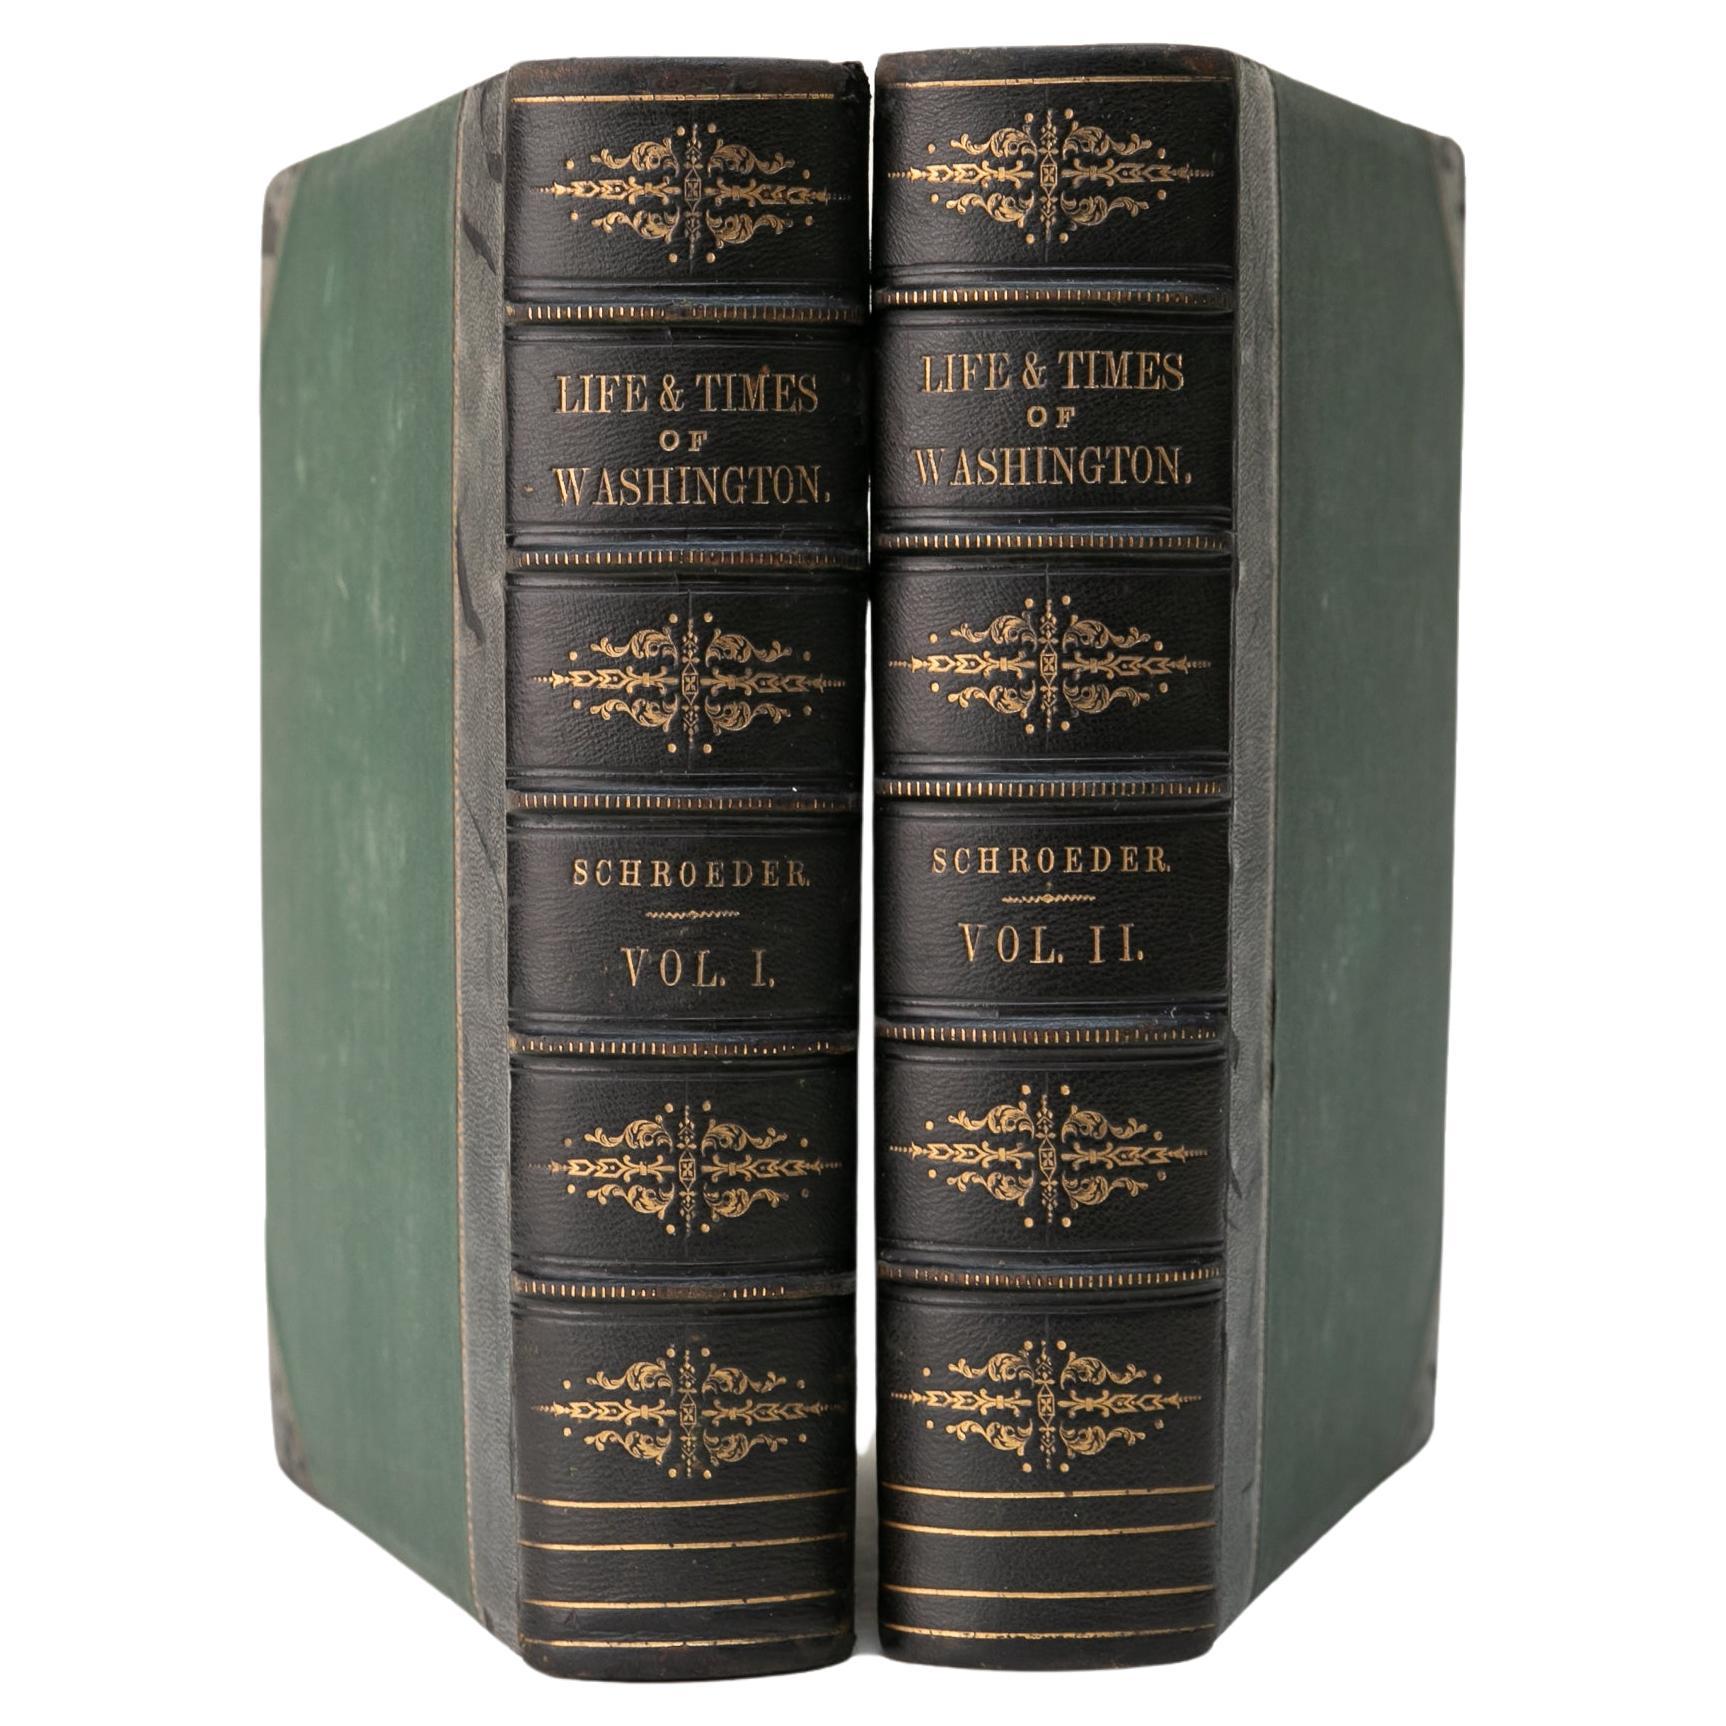 2 Volume. John F. Schroeder, Life and Times of Washington. For Sale